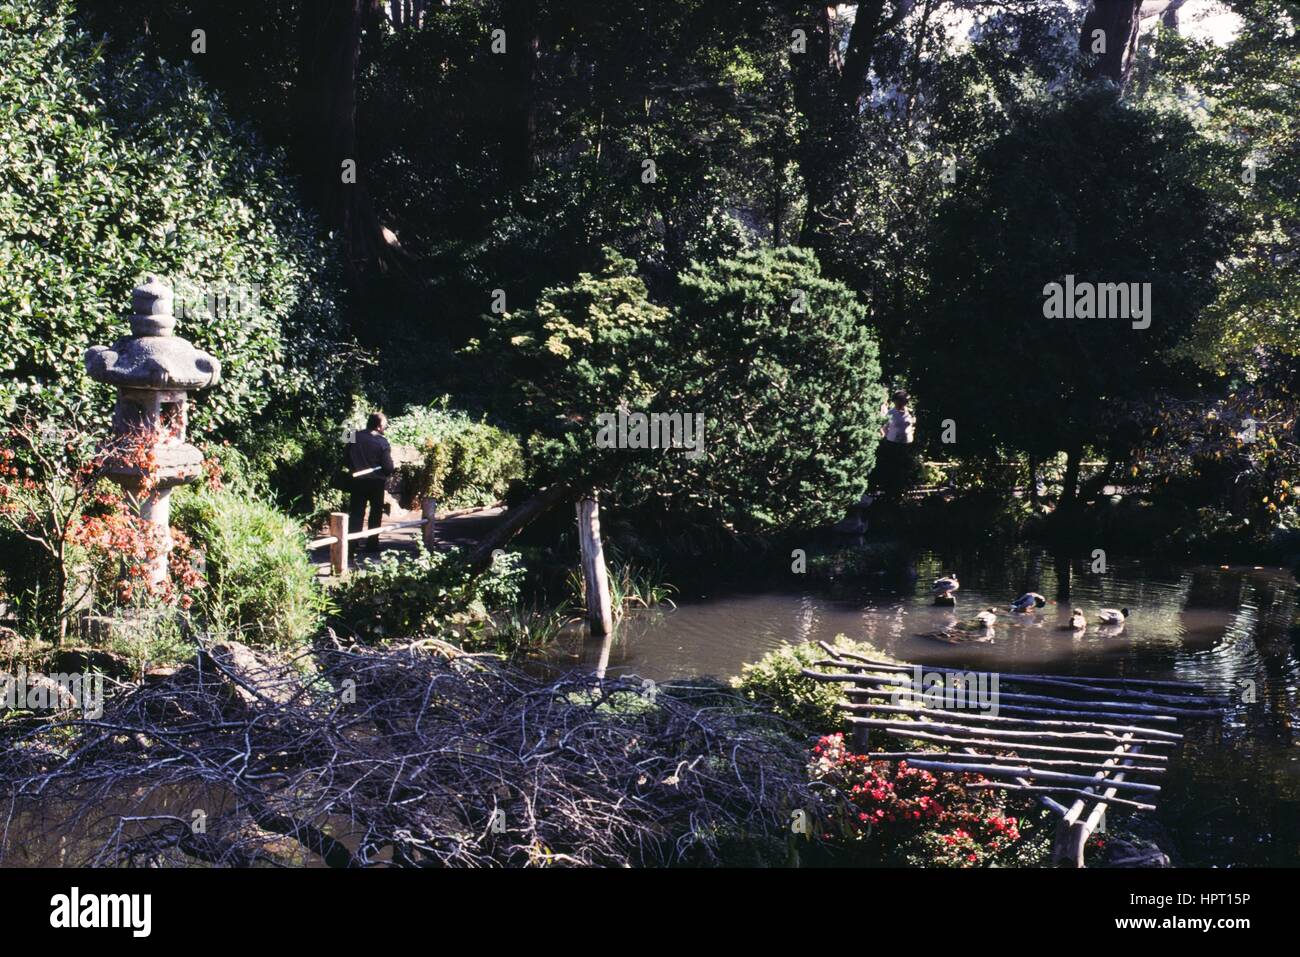 Visitors stroll along paths in the Hagiwara Japanese Tea Garden in Golden Gate Park, San Francisco, California, with a Chinese lantern and duck pond visible, 1943. Stock Photo